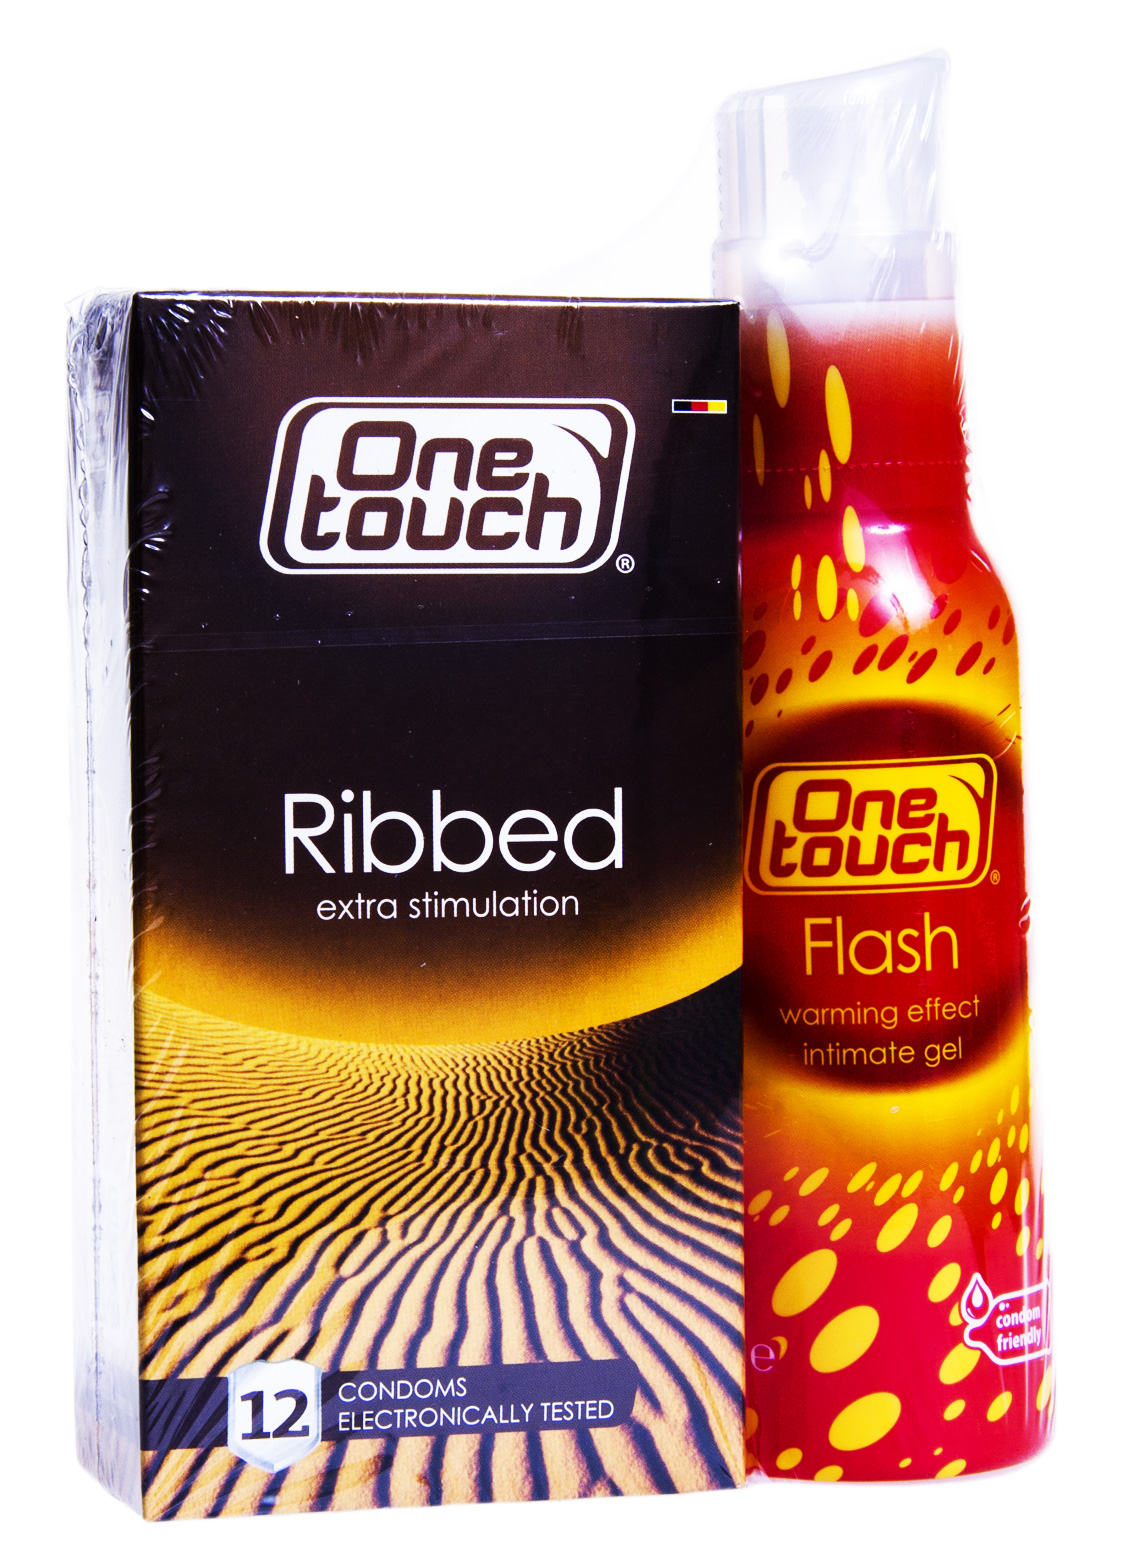 One Touch Ribbed Condoms & Flash Warming Gel